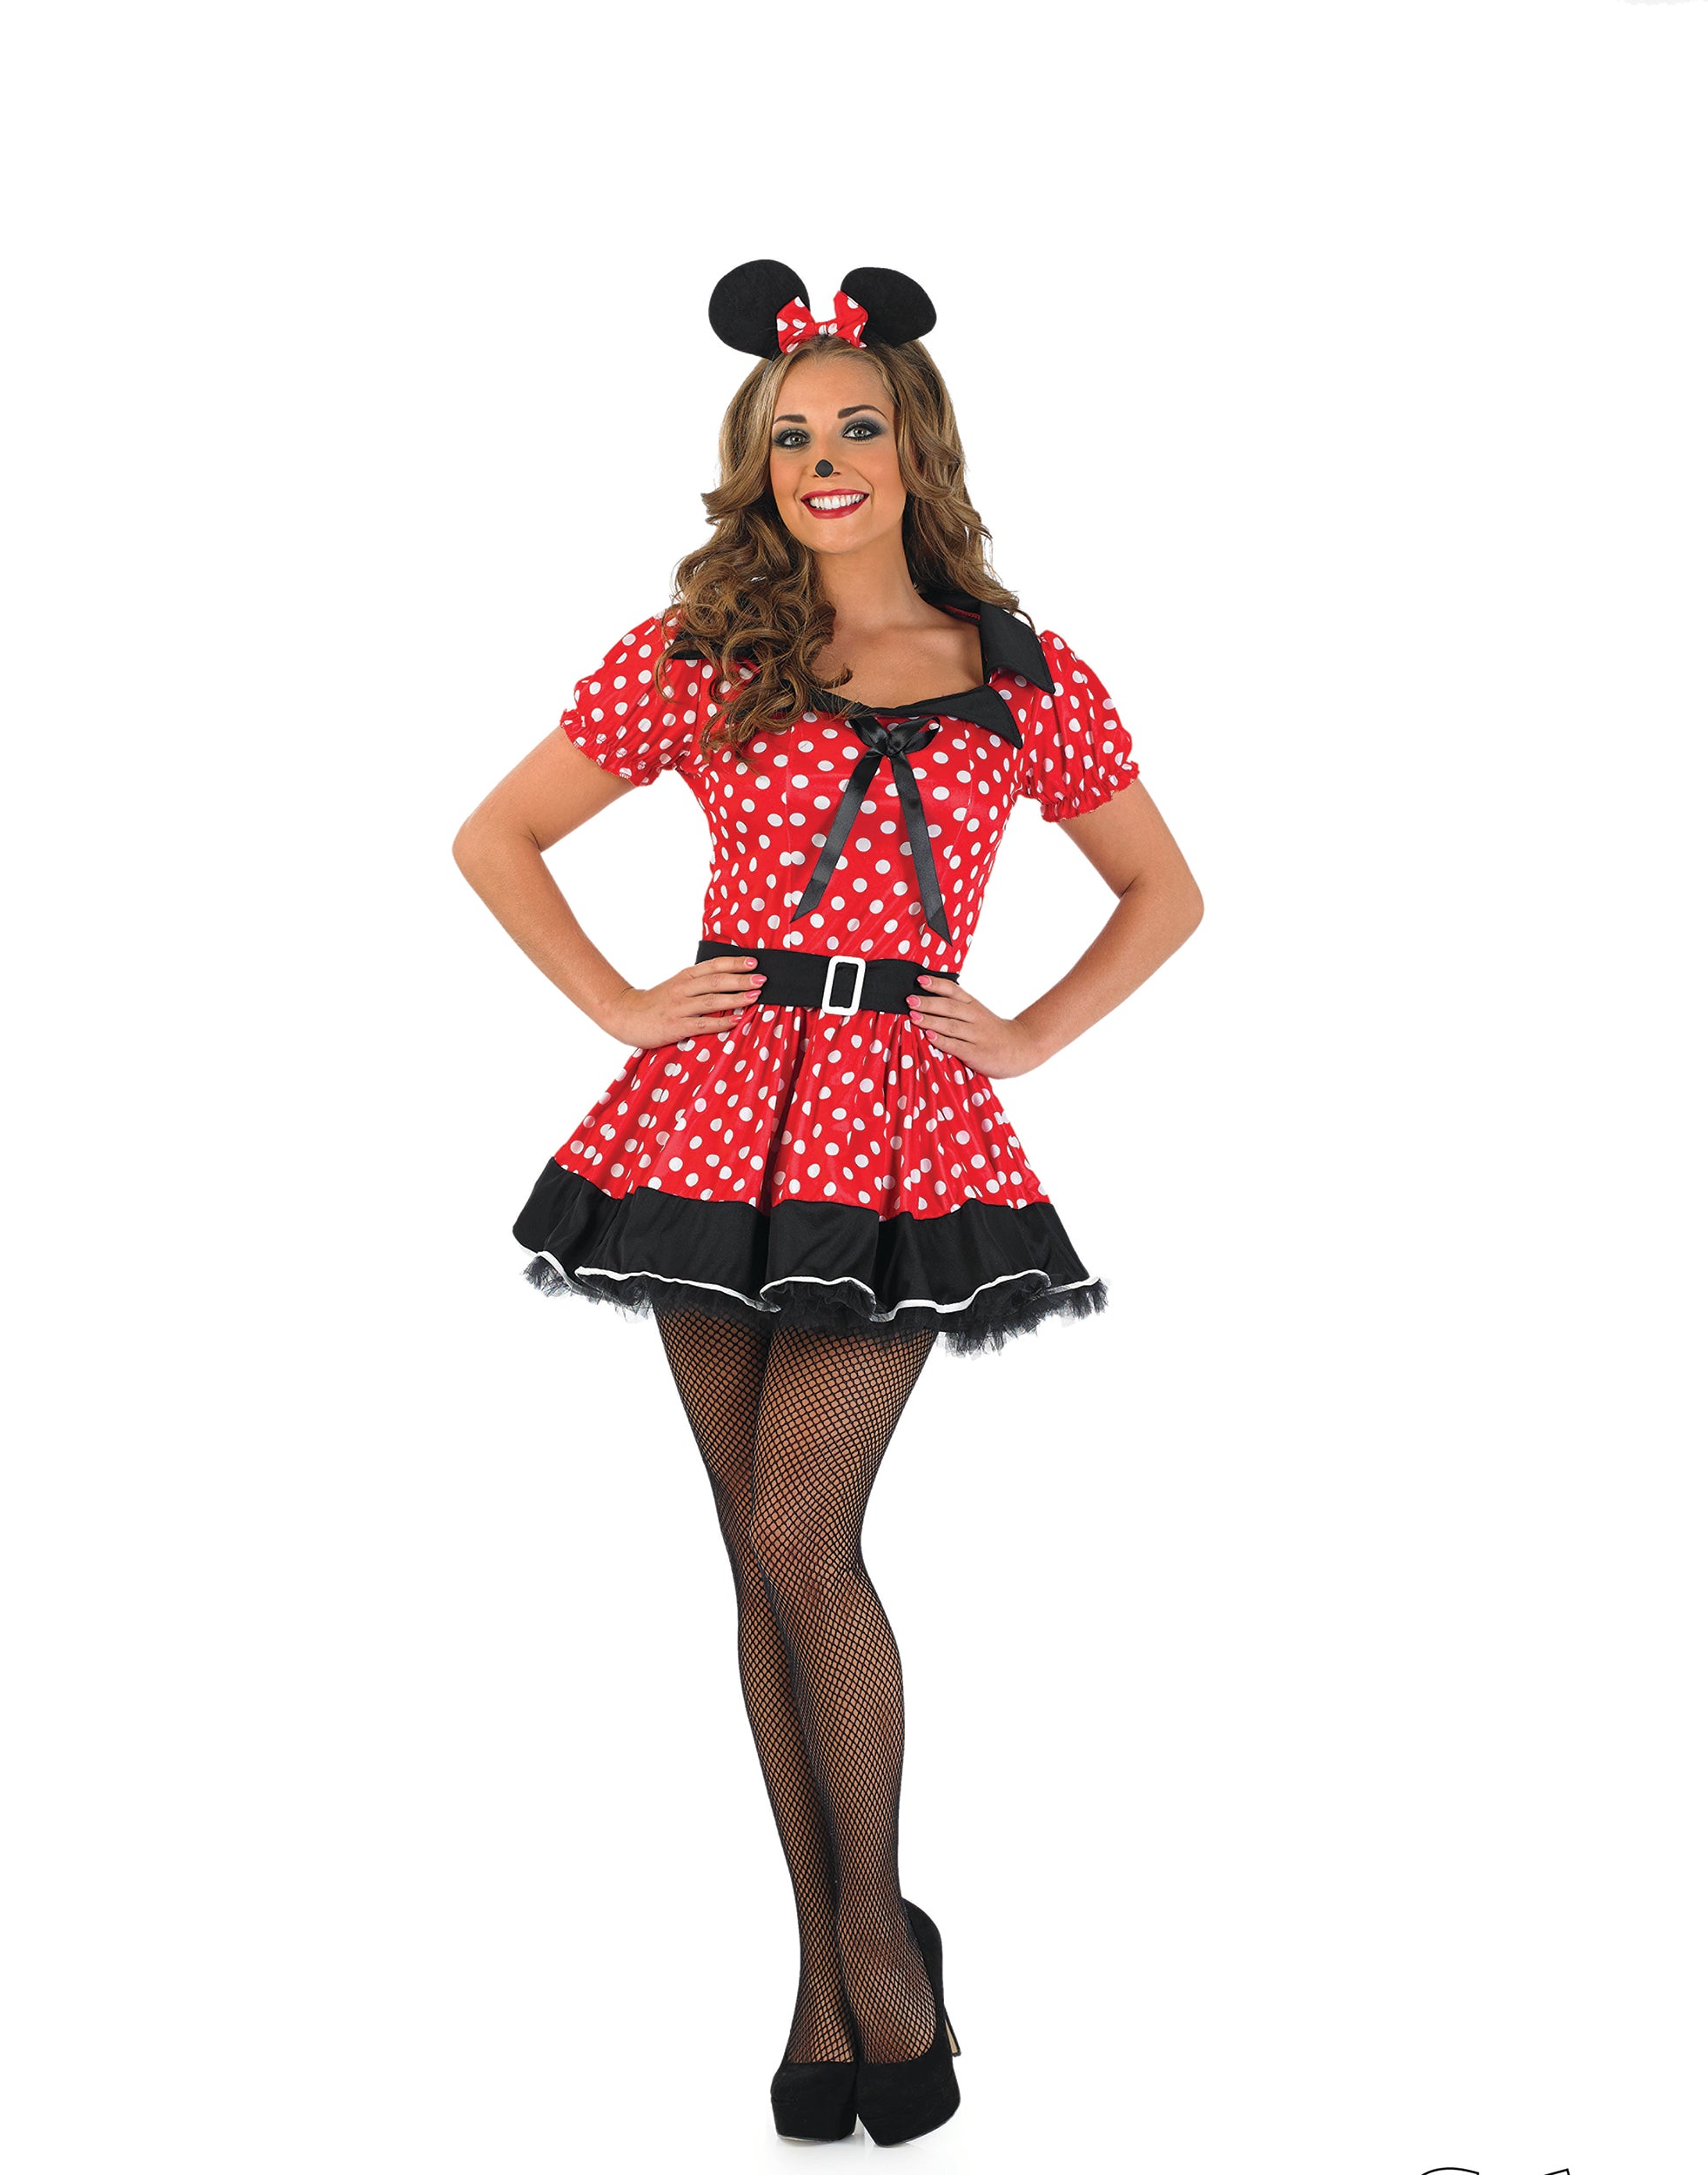 Ladies Missy Minnie Mouse fancy dress outfit.